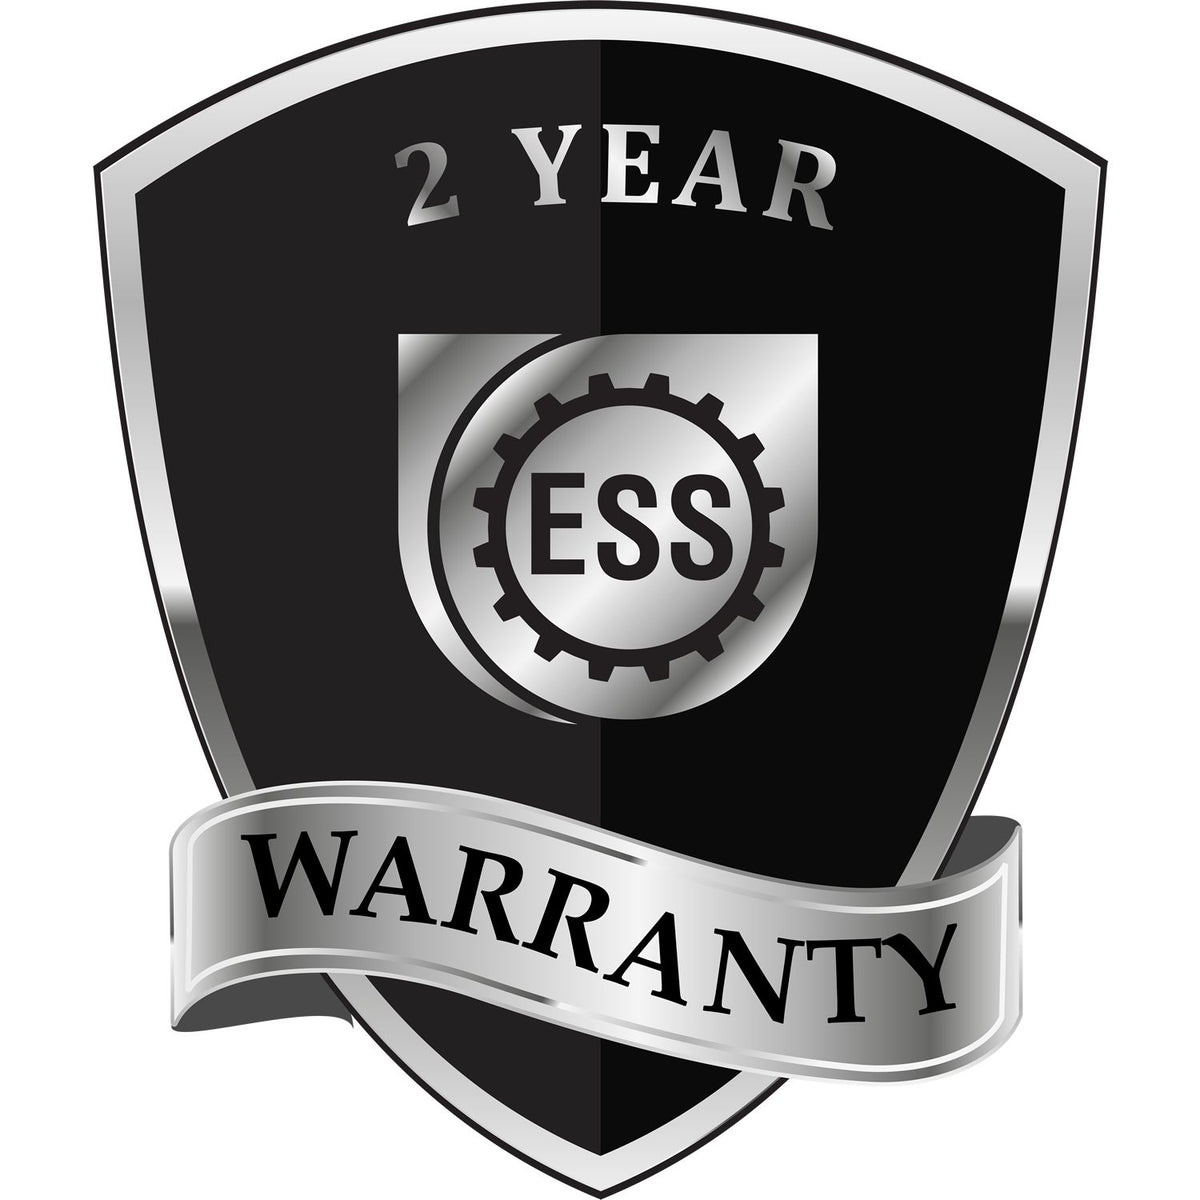 A black and silver badge or emblem showing warranty information for the State of Montana Extended Long Reach Geologist Seal